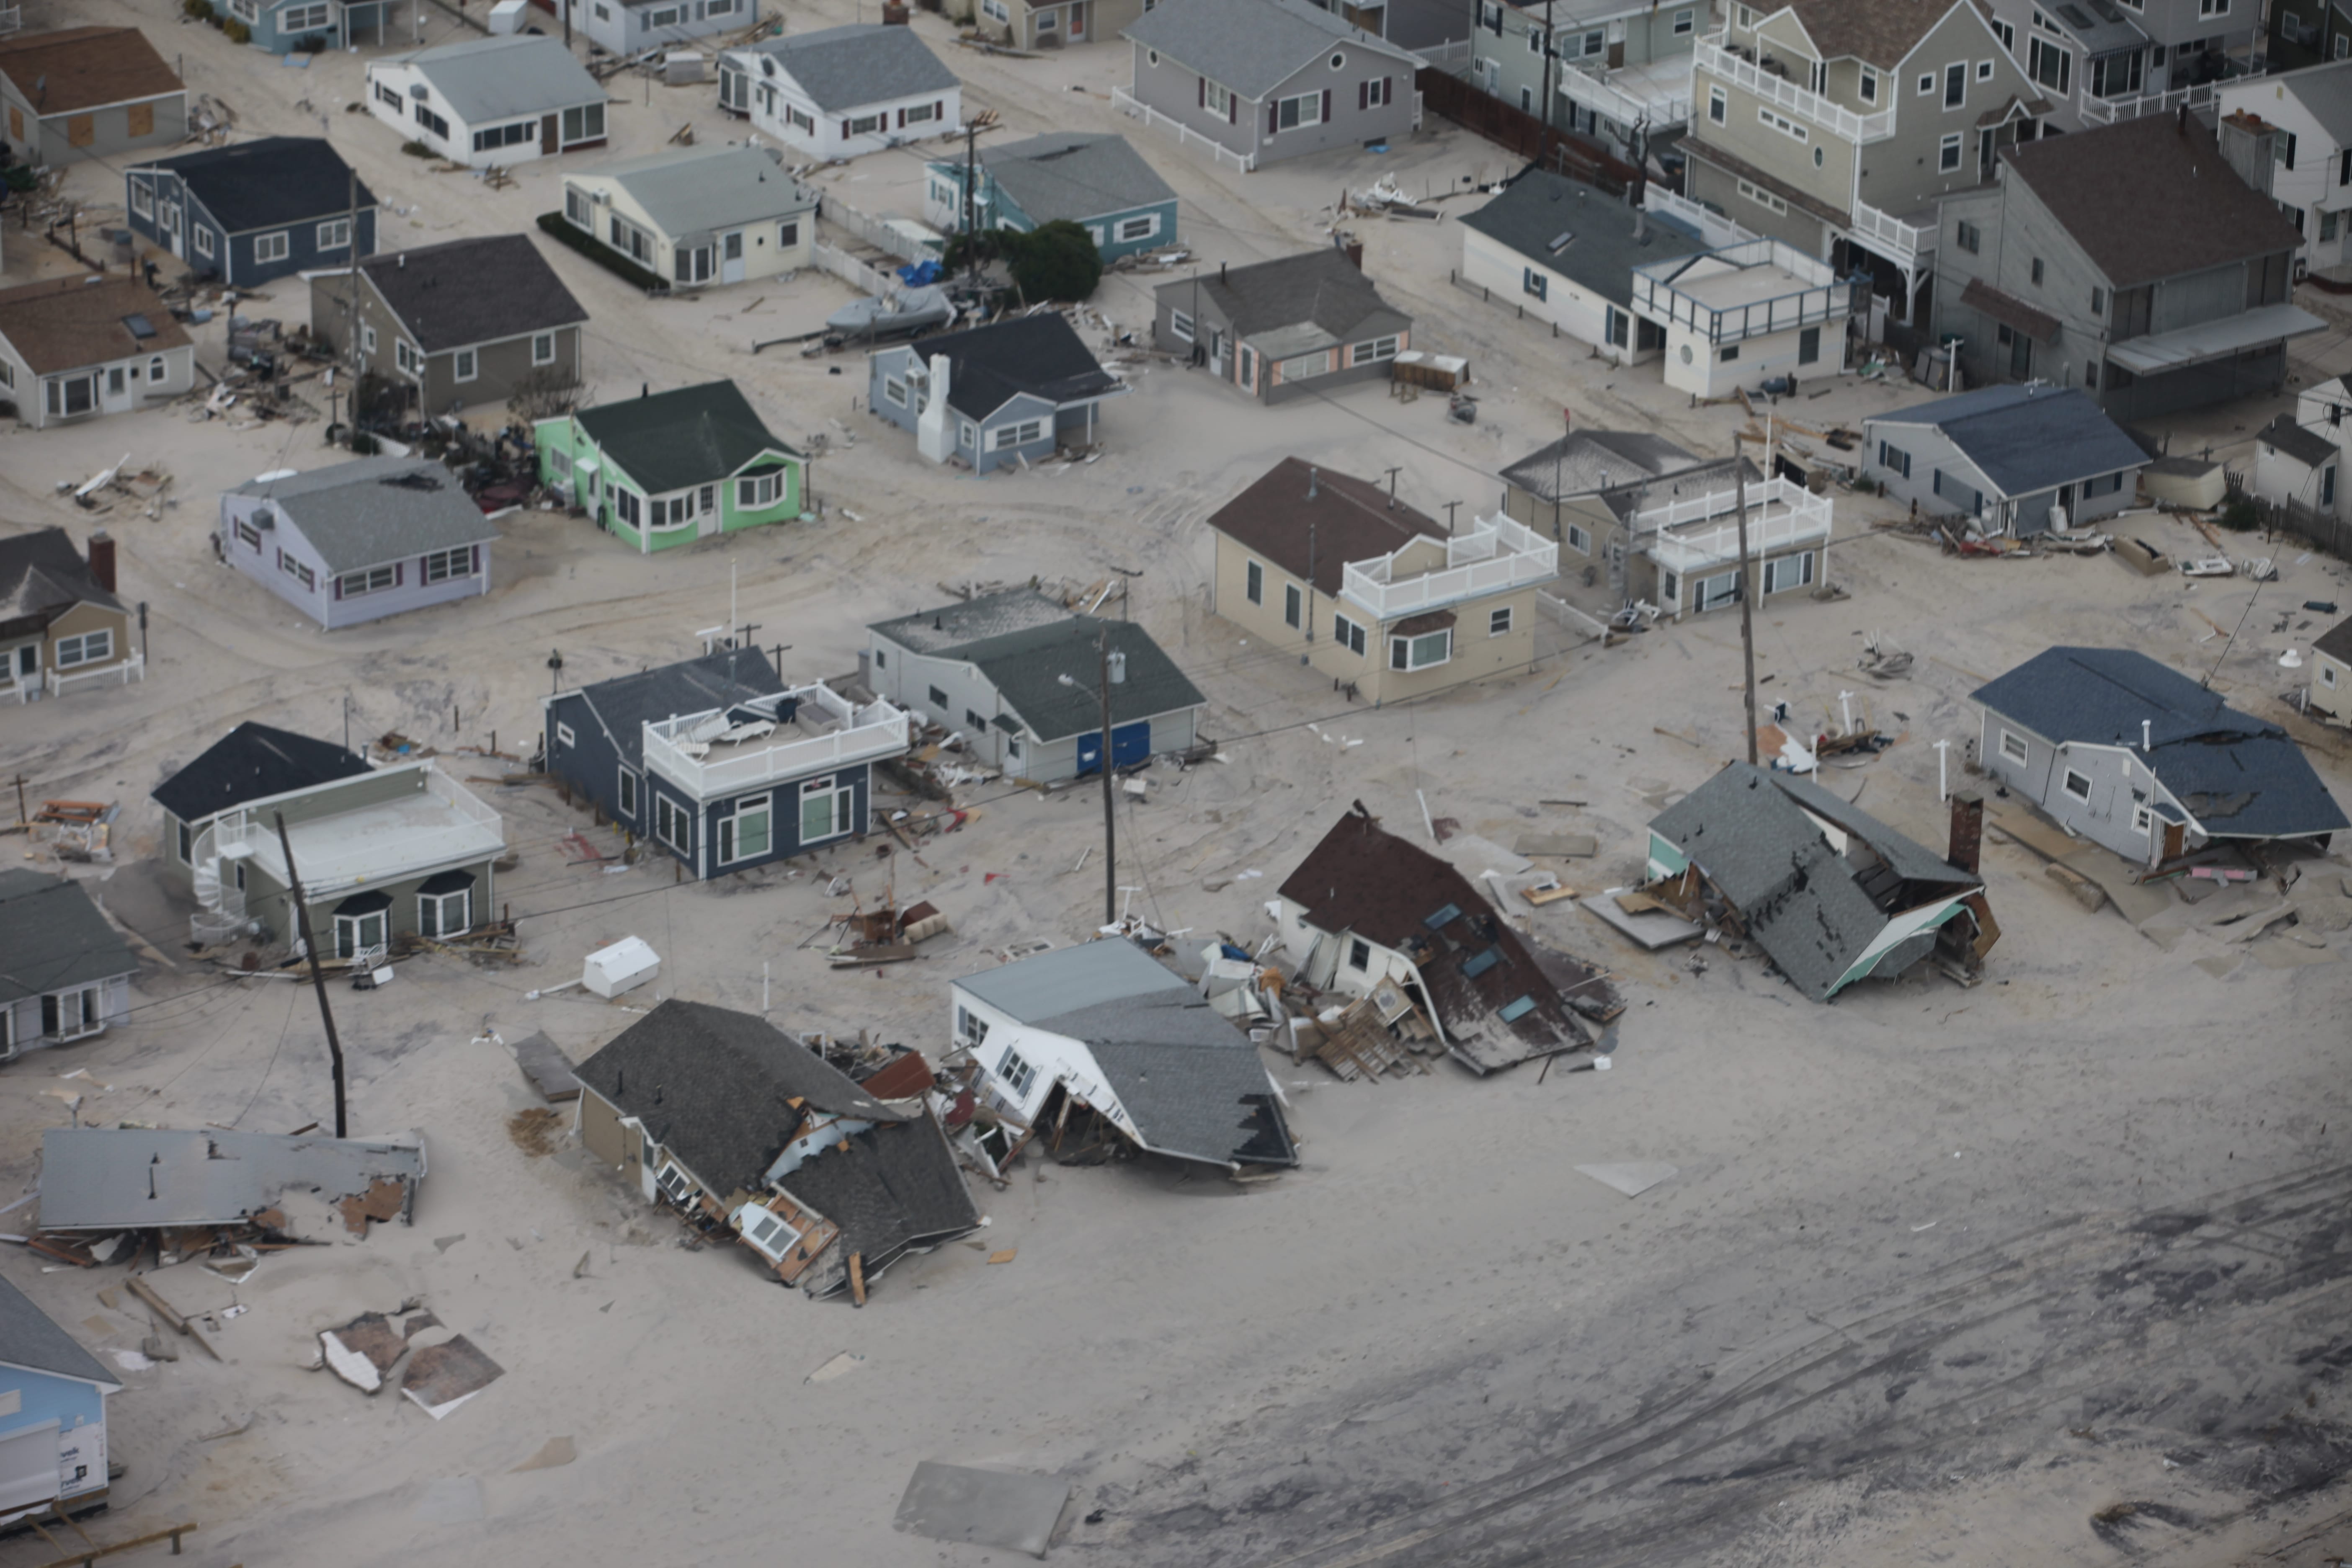 Houses on the Jersey Shore showing extensive damage from Hurricane Sandy.